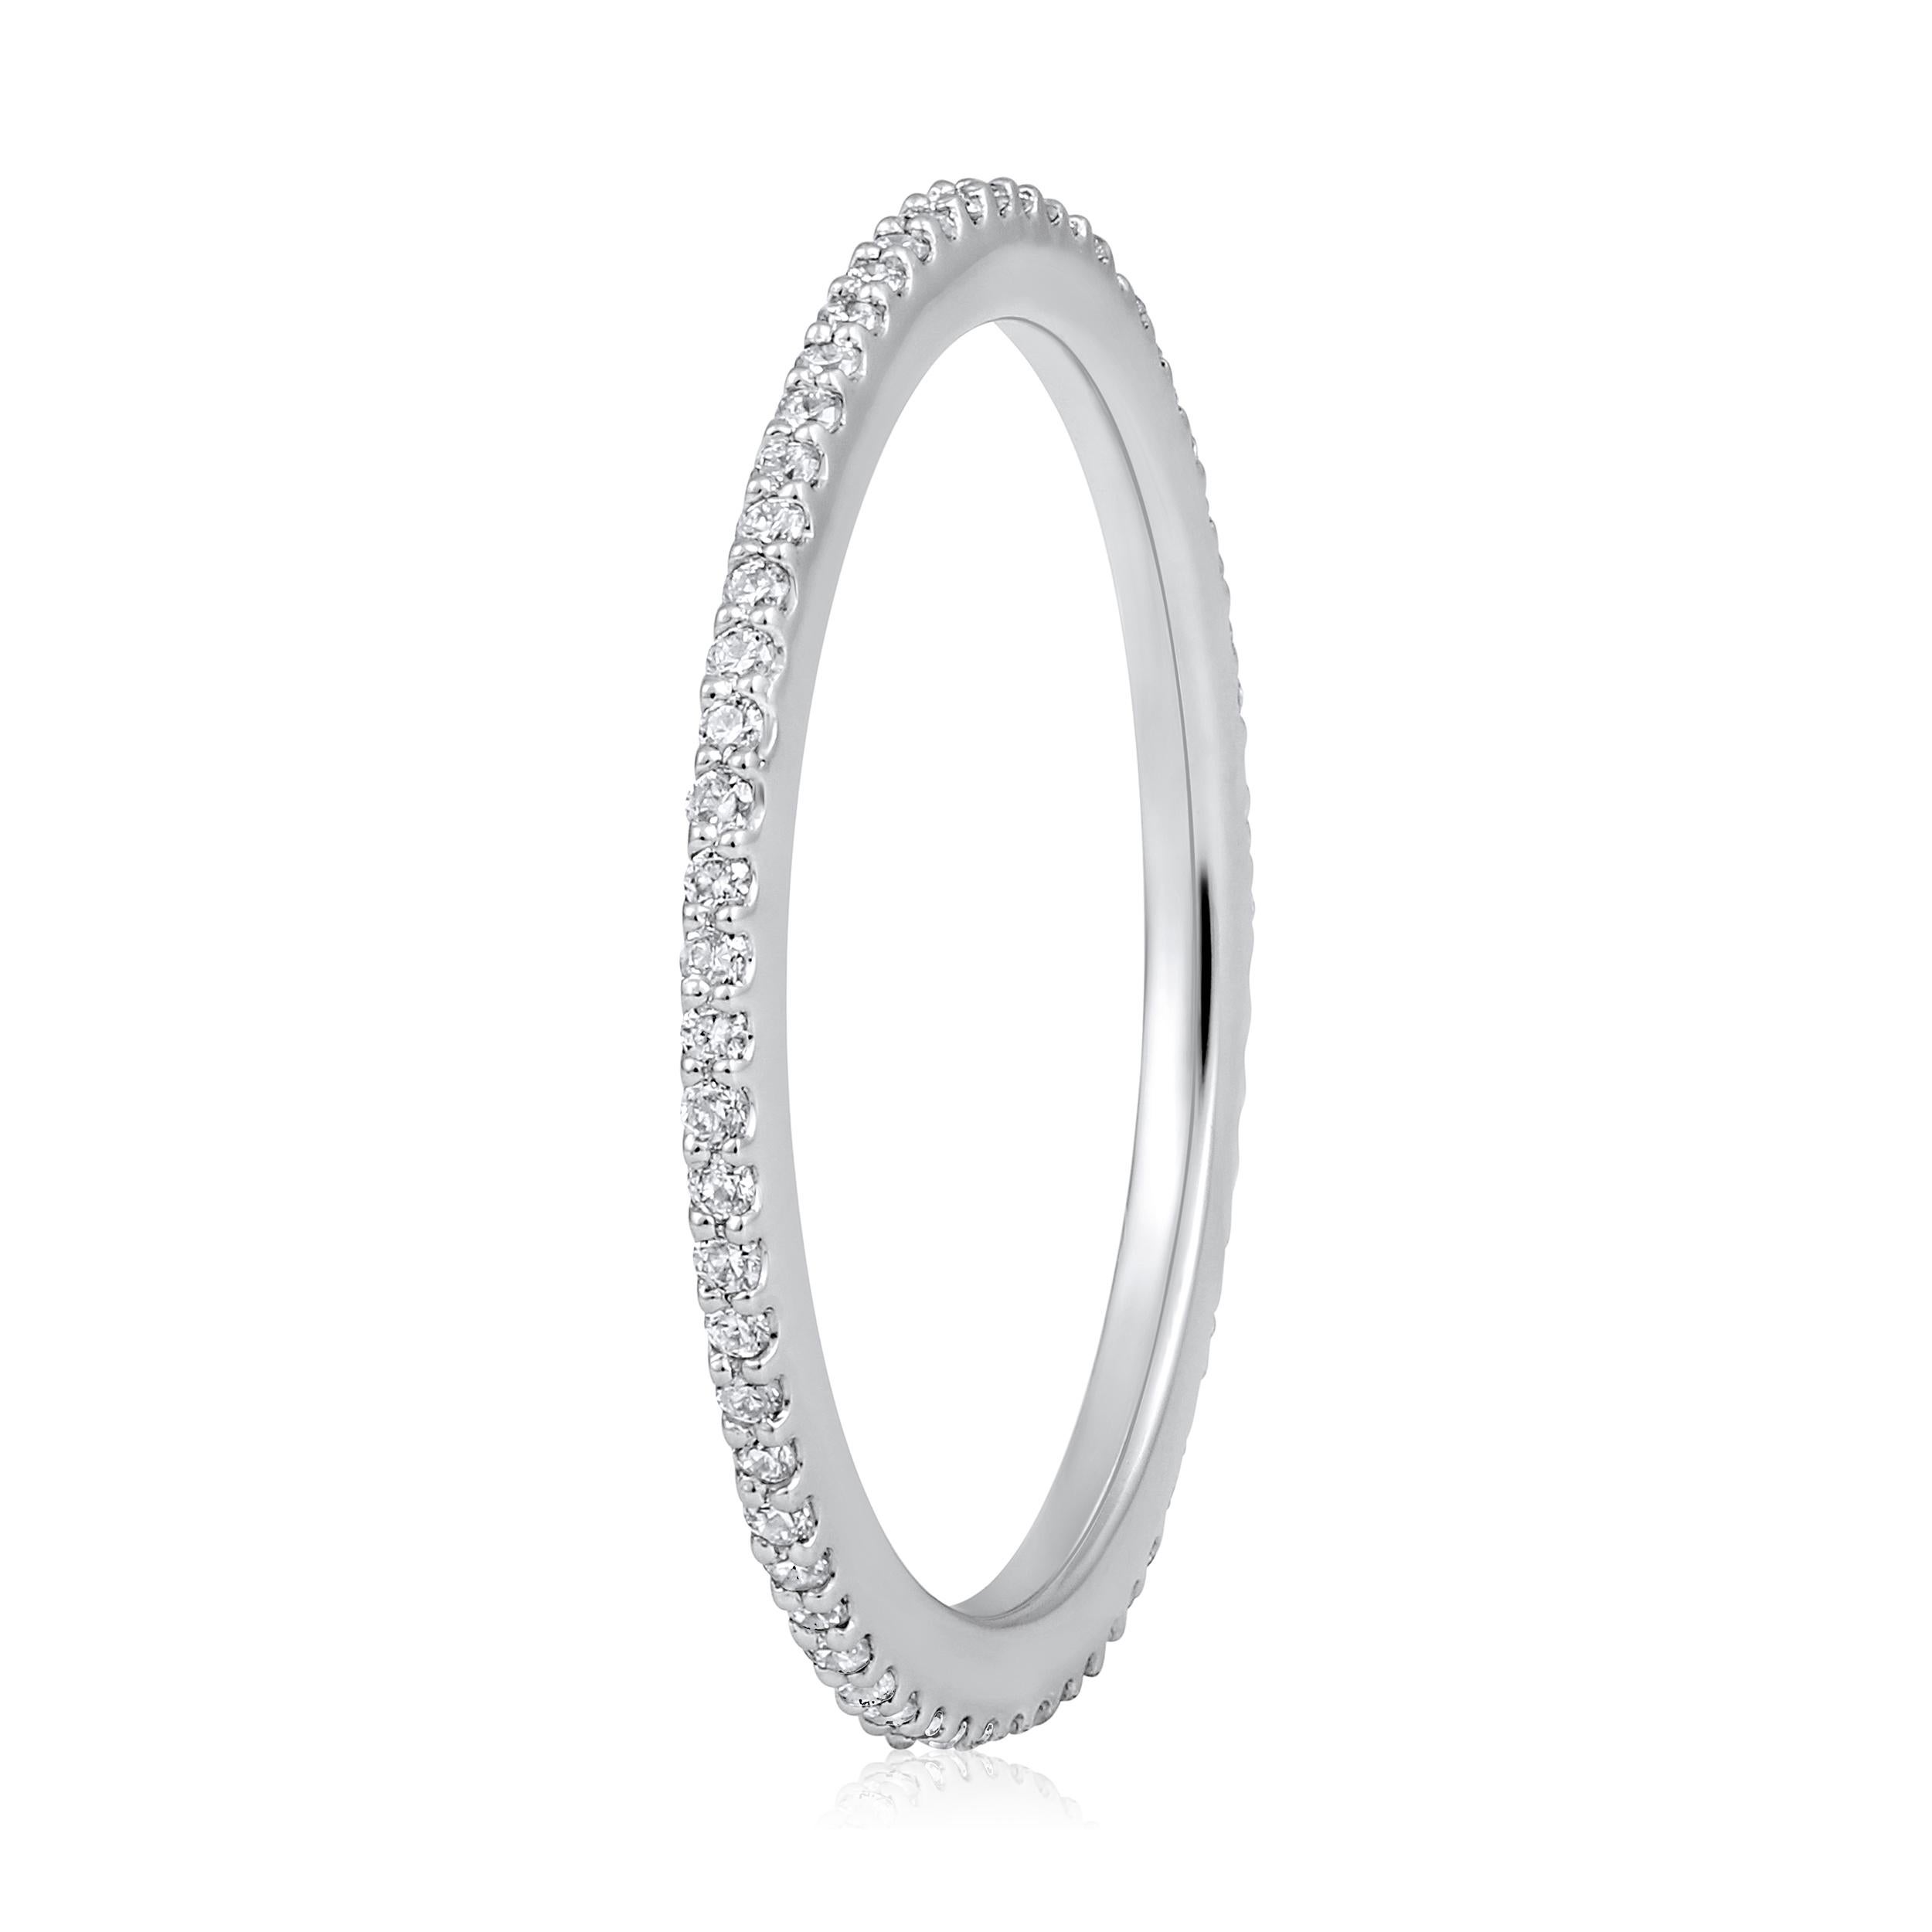 Ring Size: US 7 

Crafted in 1.38 grams of 14K White Gold, the ring contains 63 stones of Round Diamonds with a total of 0.24 carat in G-H color and SI clarity.

CONTEMPORARY AND TIMELESS ESSENCE: Crafted in 14-karat/18-karat with 100% natural